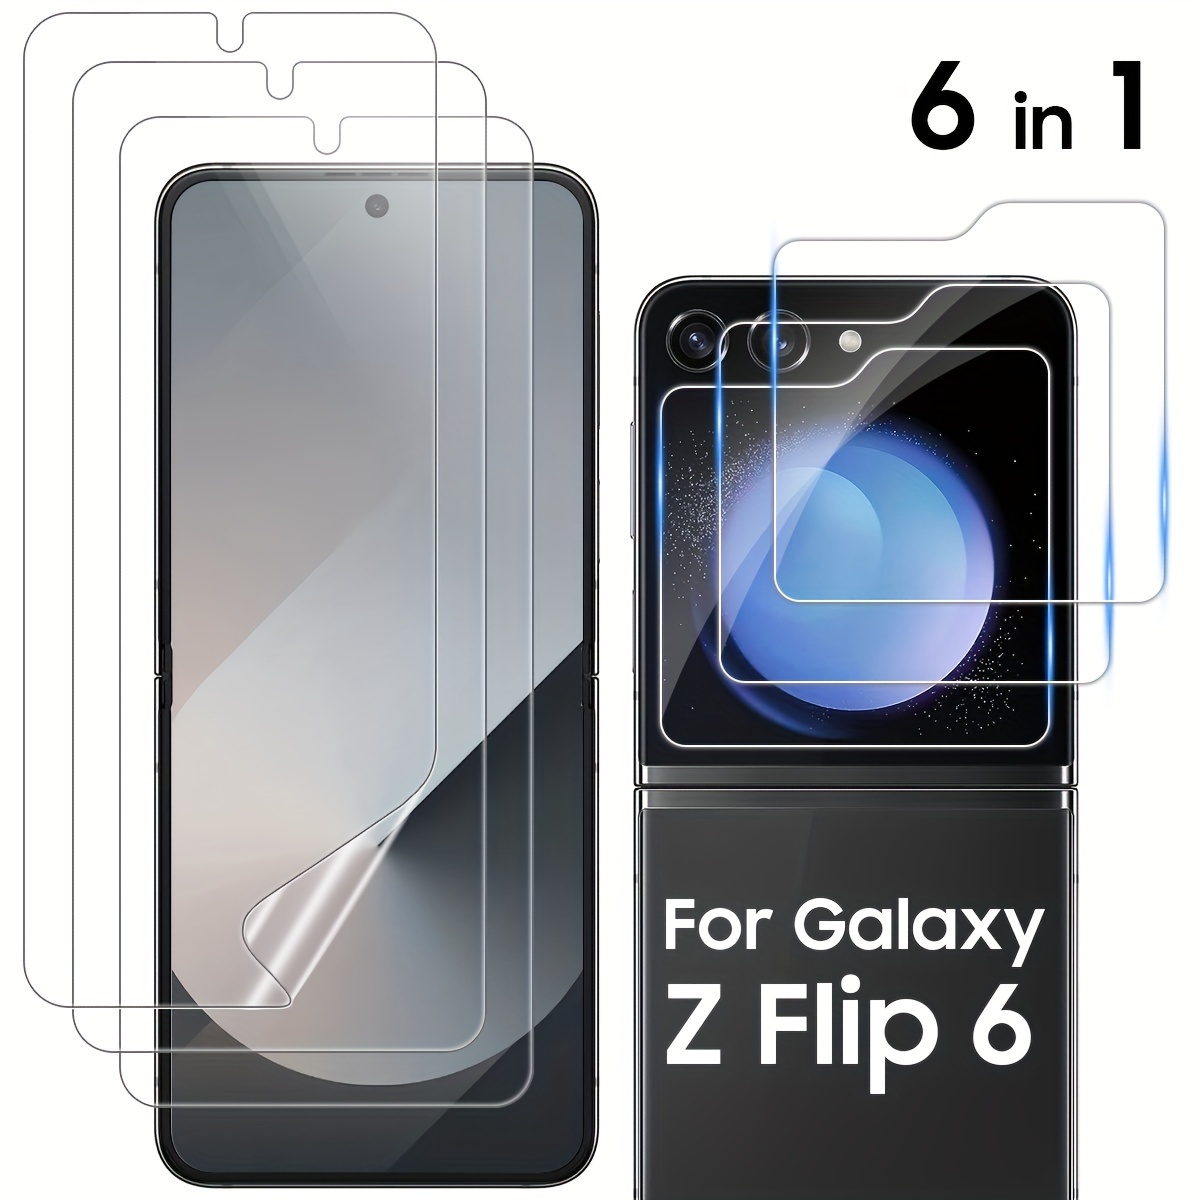 

For Samsung Galaxy Z Flip 6 Screen Protector, 3 Pcs Inside Flexible Tpu Film + 3 Pcs Front Tempered Glass, Hd Clear, No Creases, No Bubbles